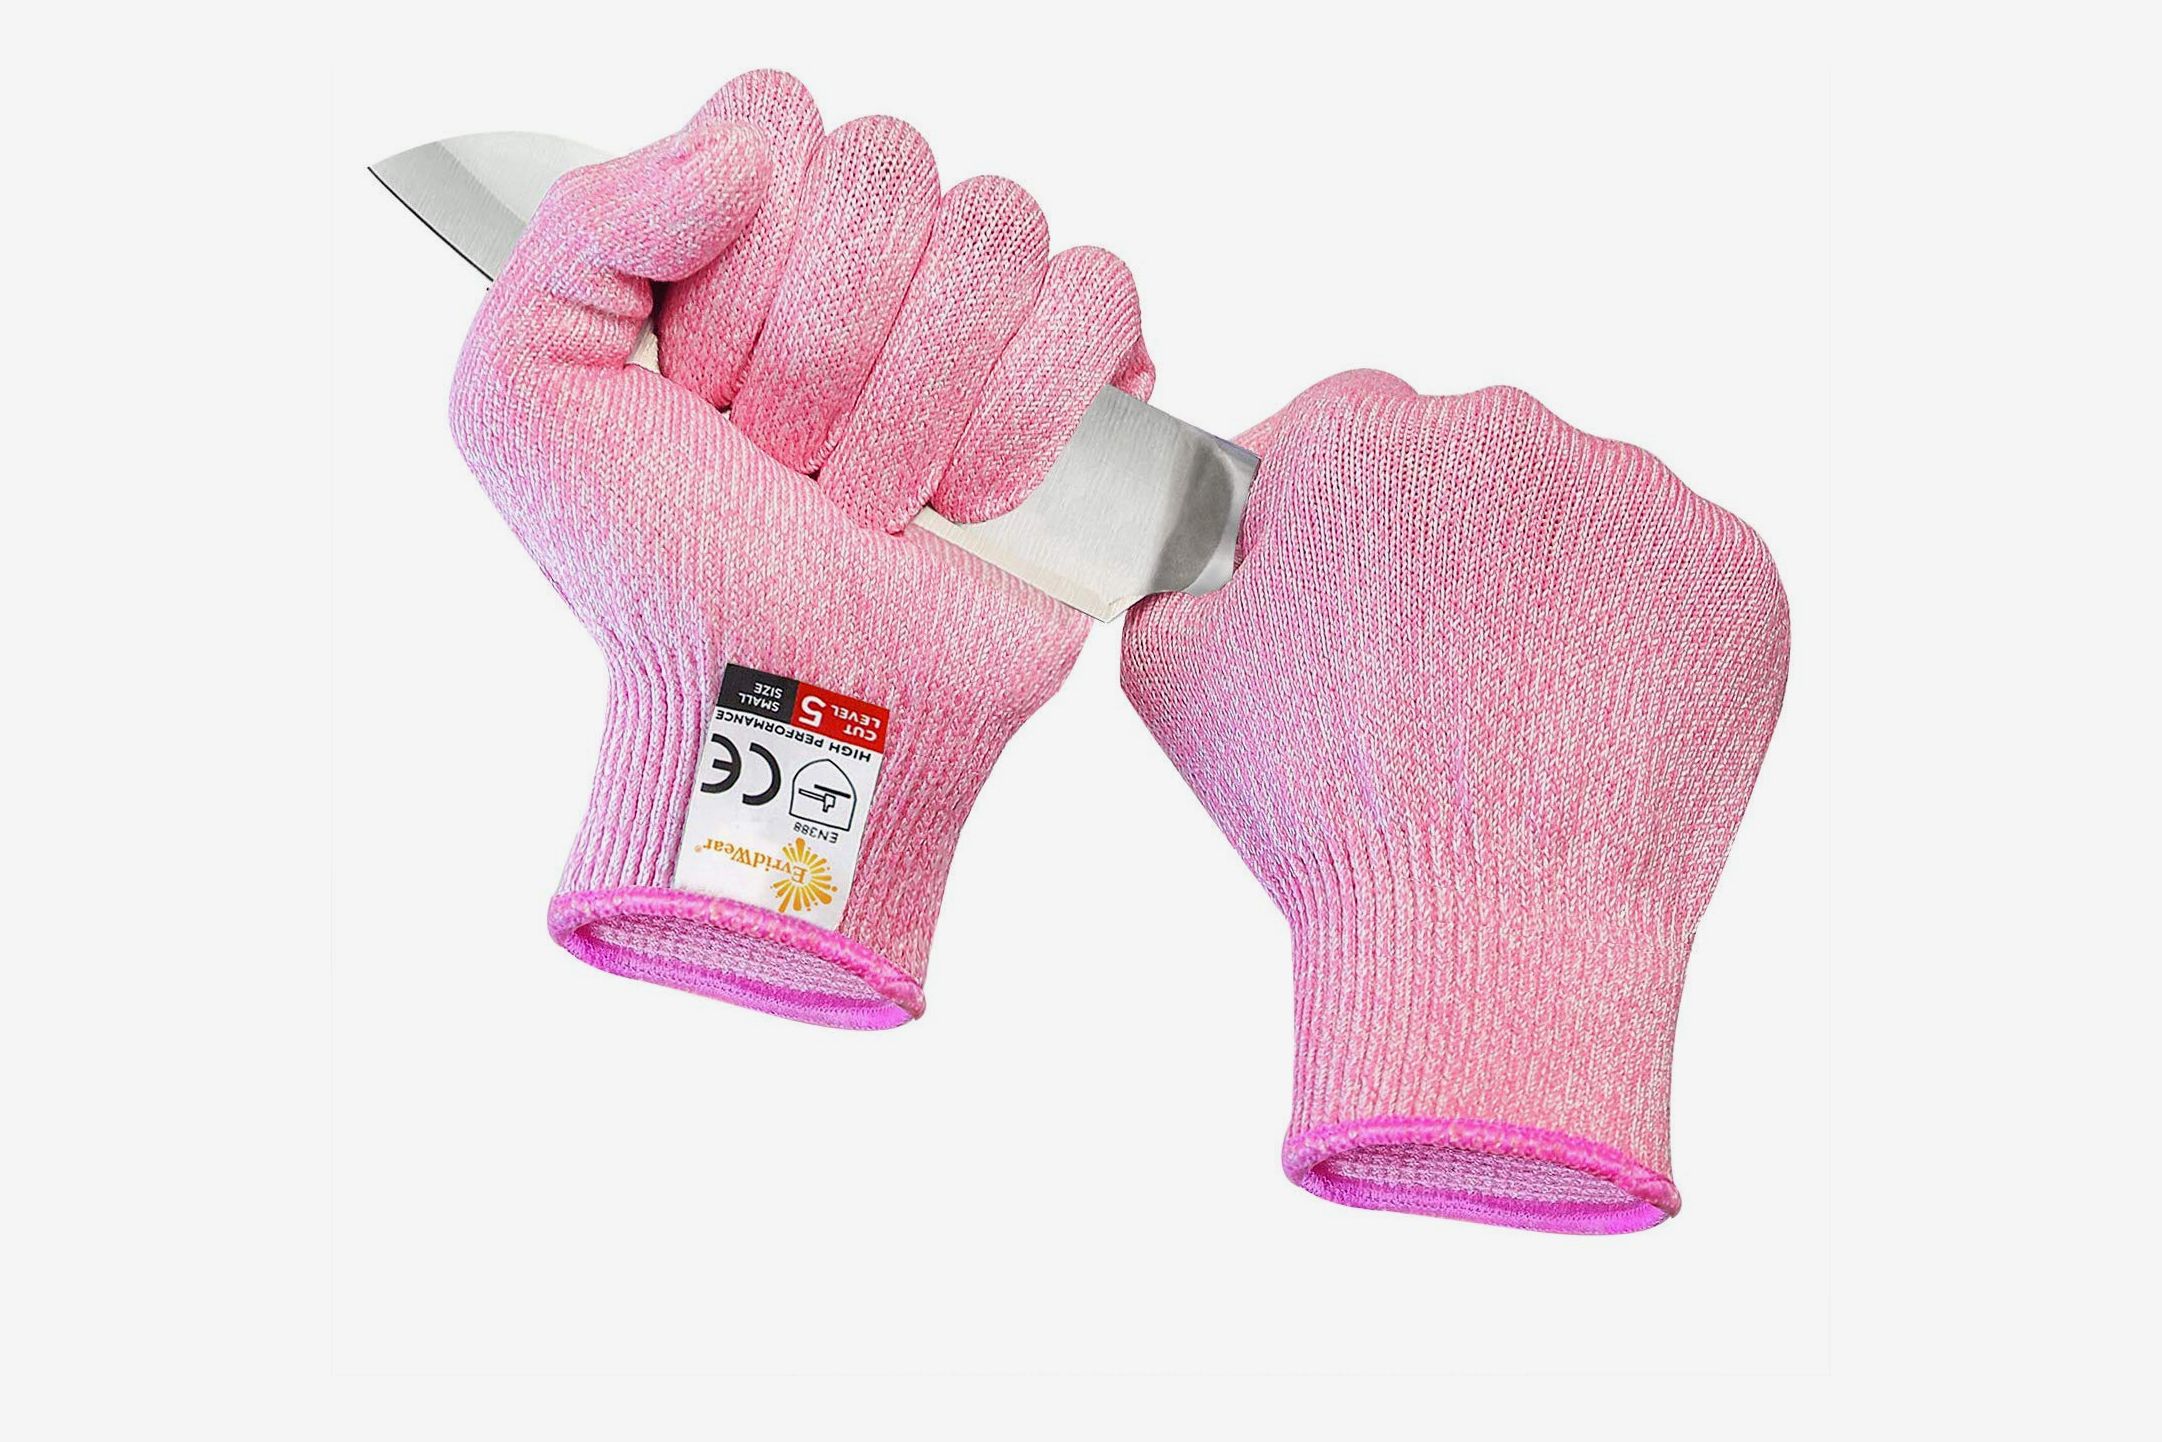 EvridWear 2 Colors Cut Resistant Gloves with Strong Silicone Grip Dots 